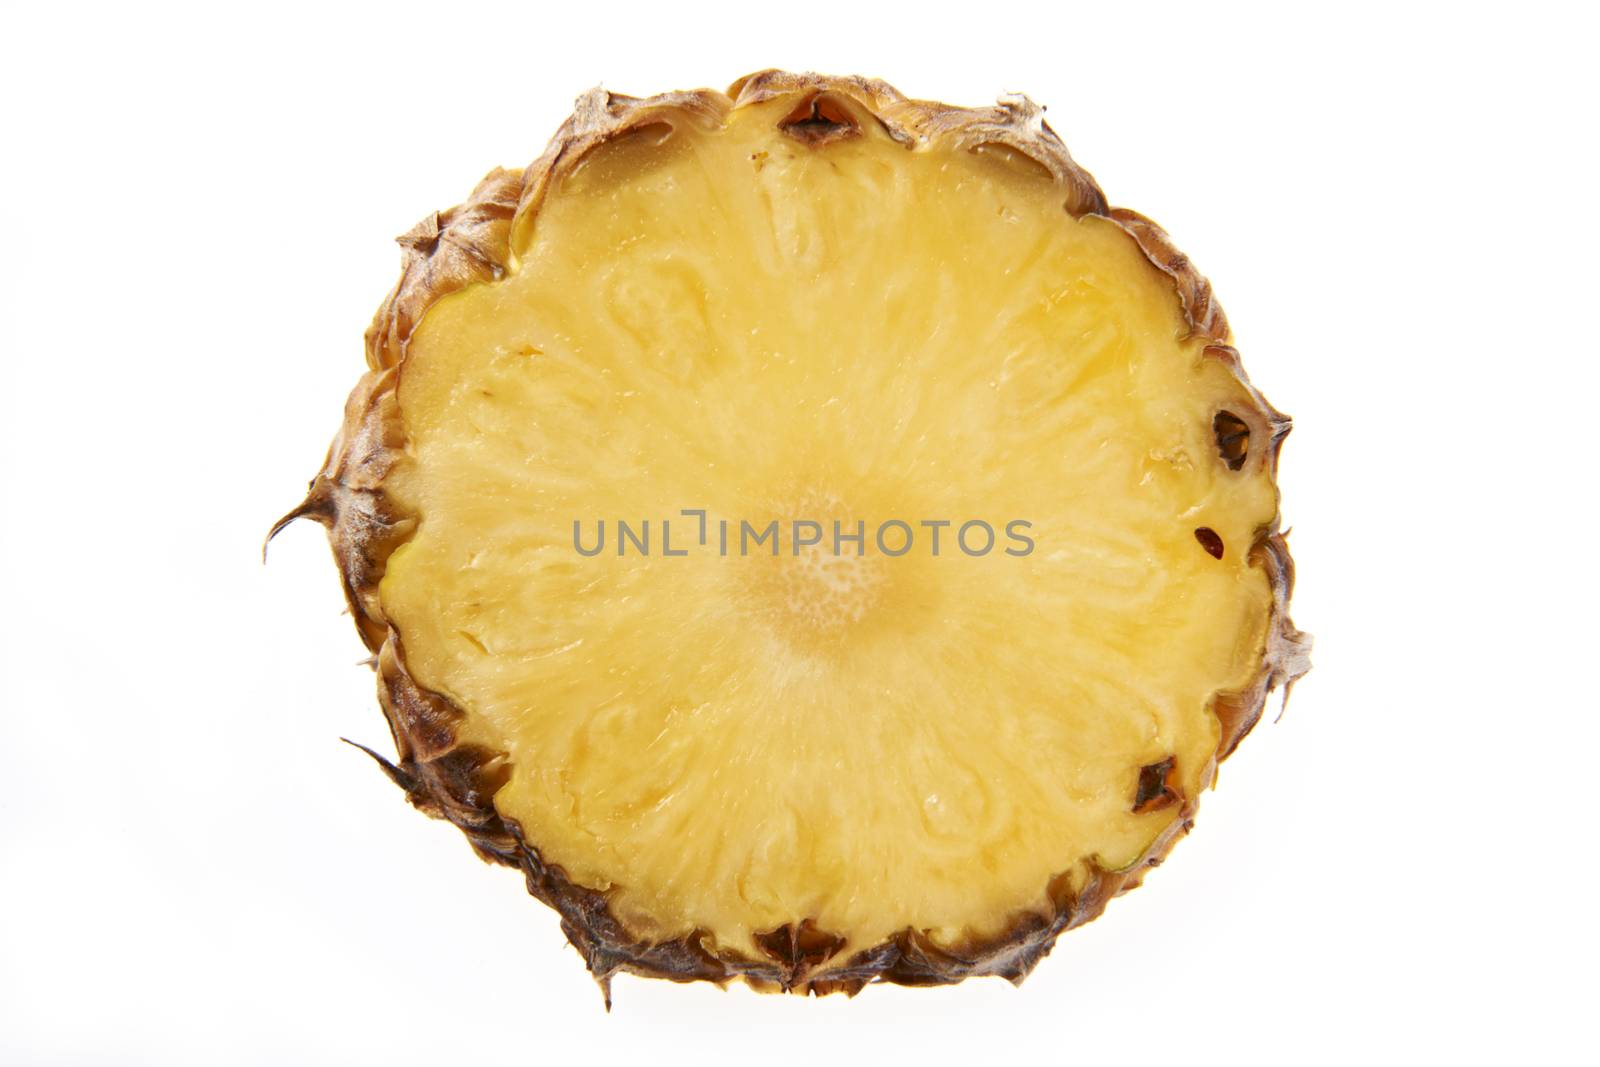 Overhead view of slice of pineapple on plain background